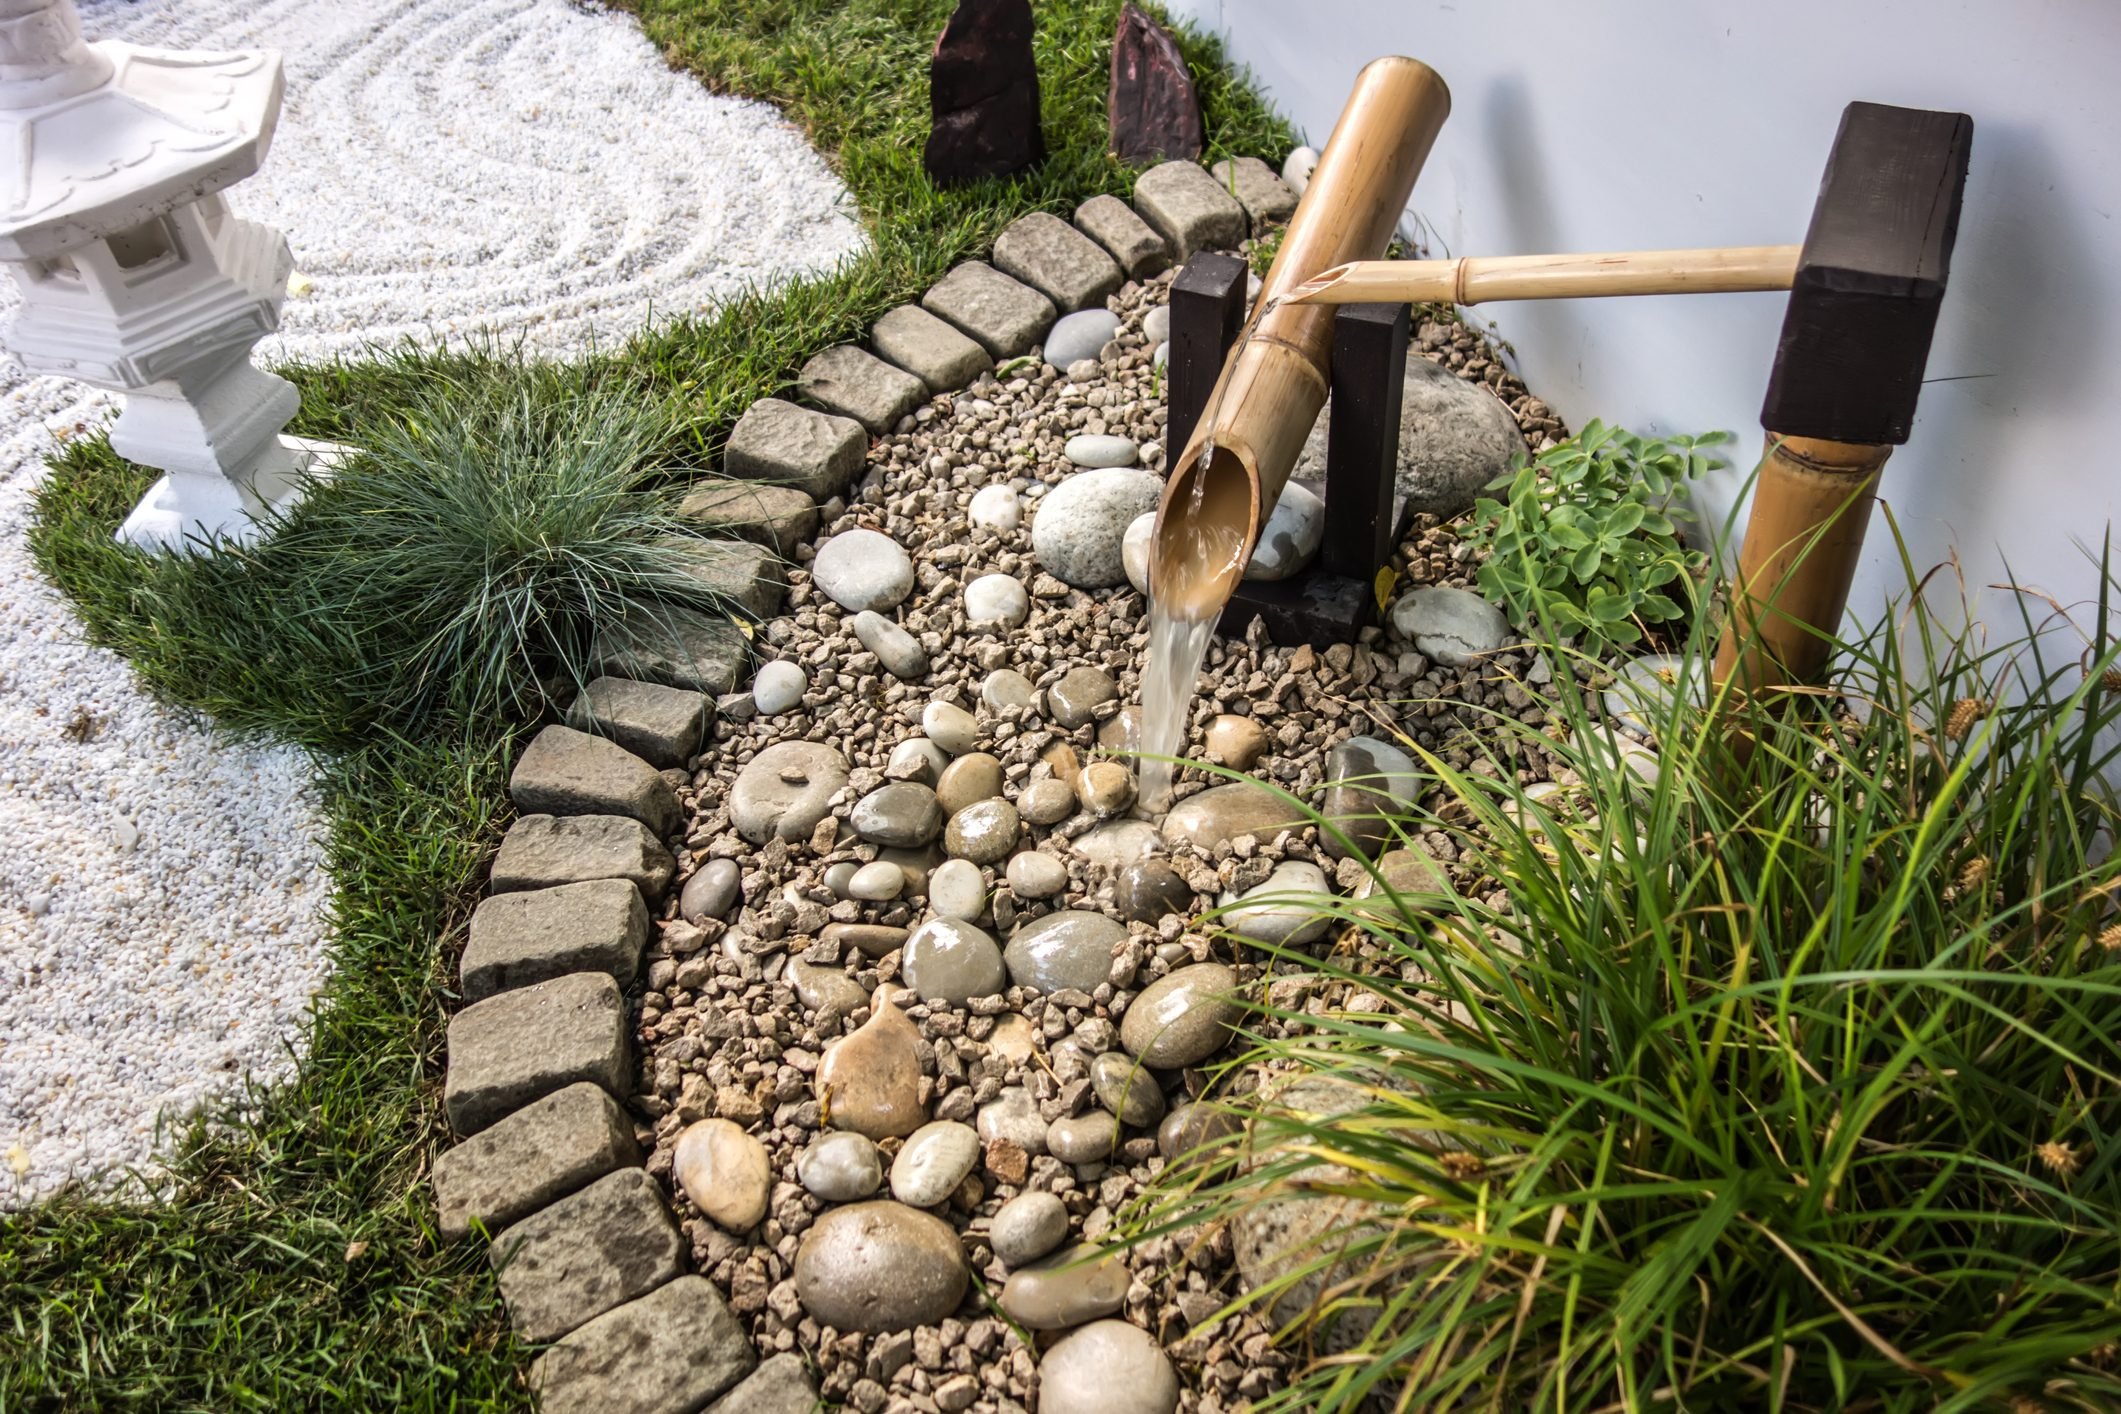 How Japanese Rock Gardens Became Expressions of Zen